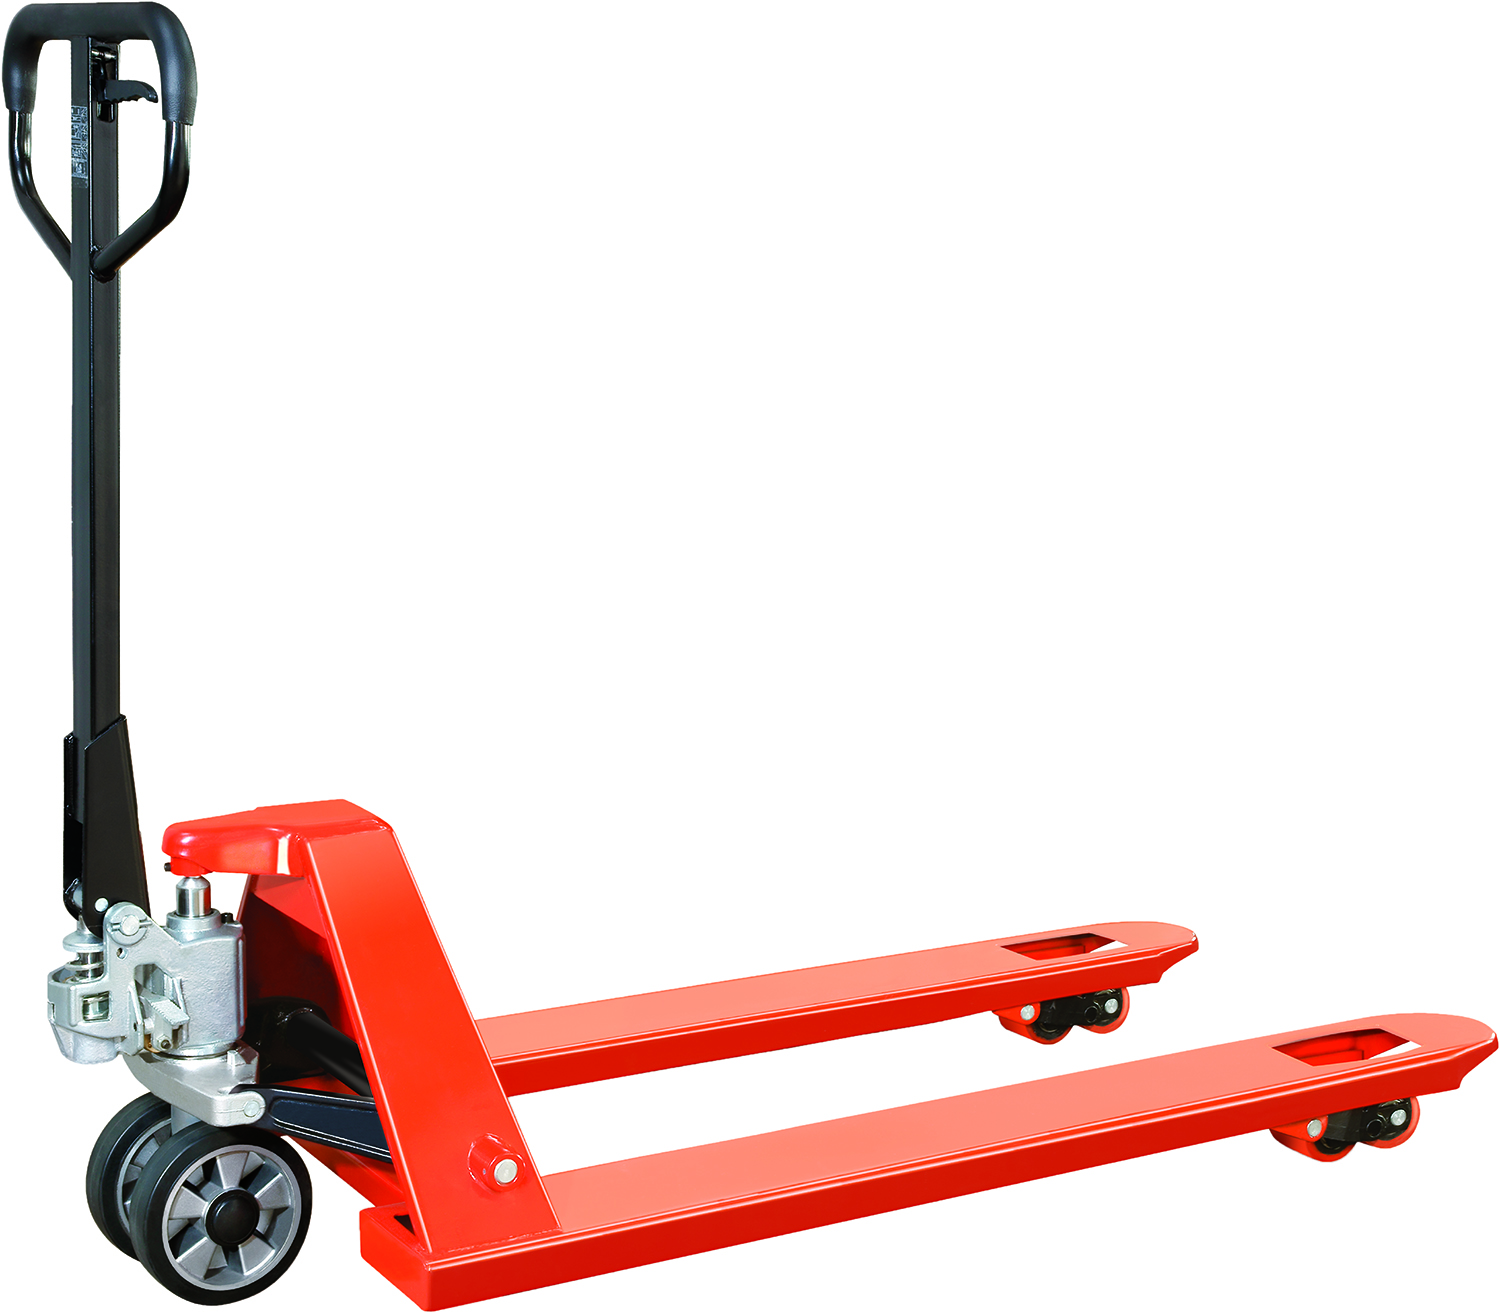 China NEW HAND PALLET TRUCK Manufacturers